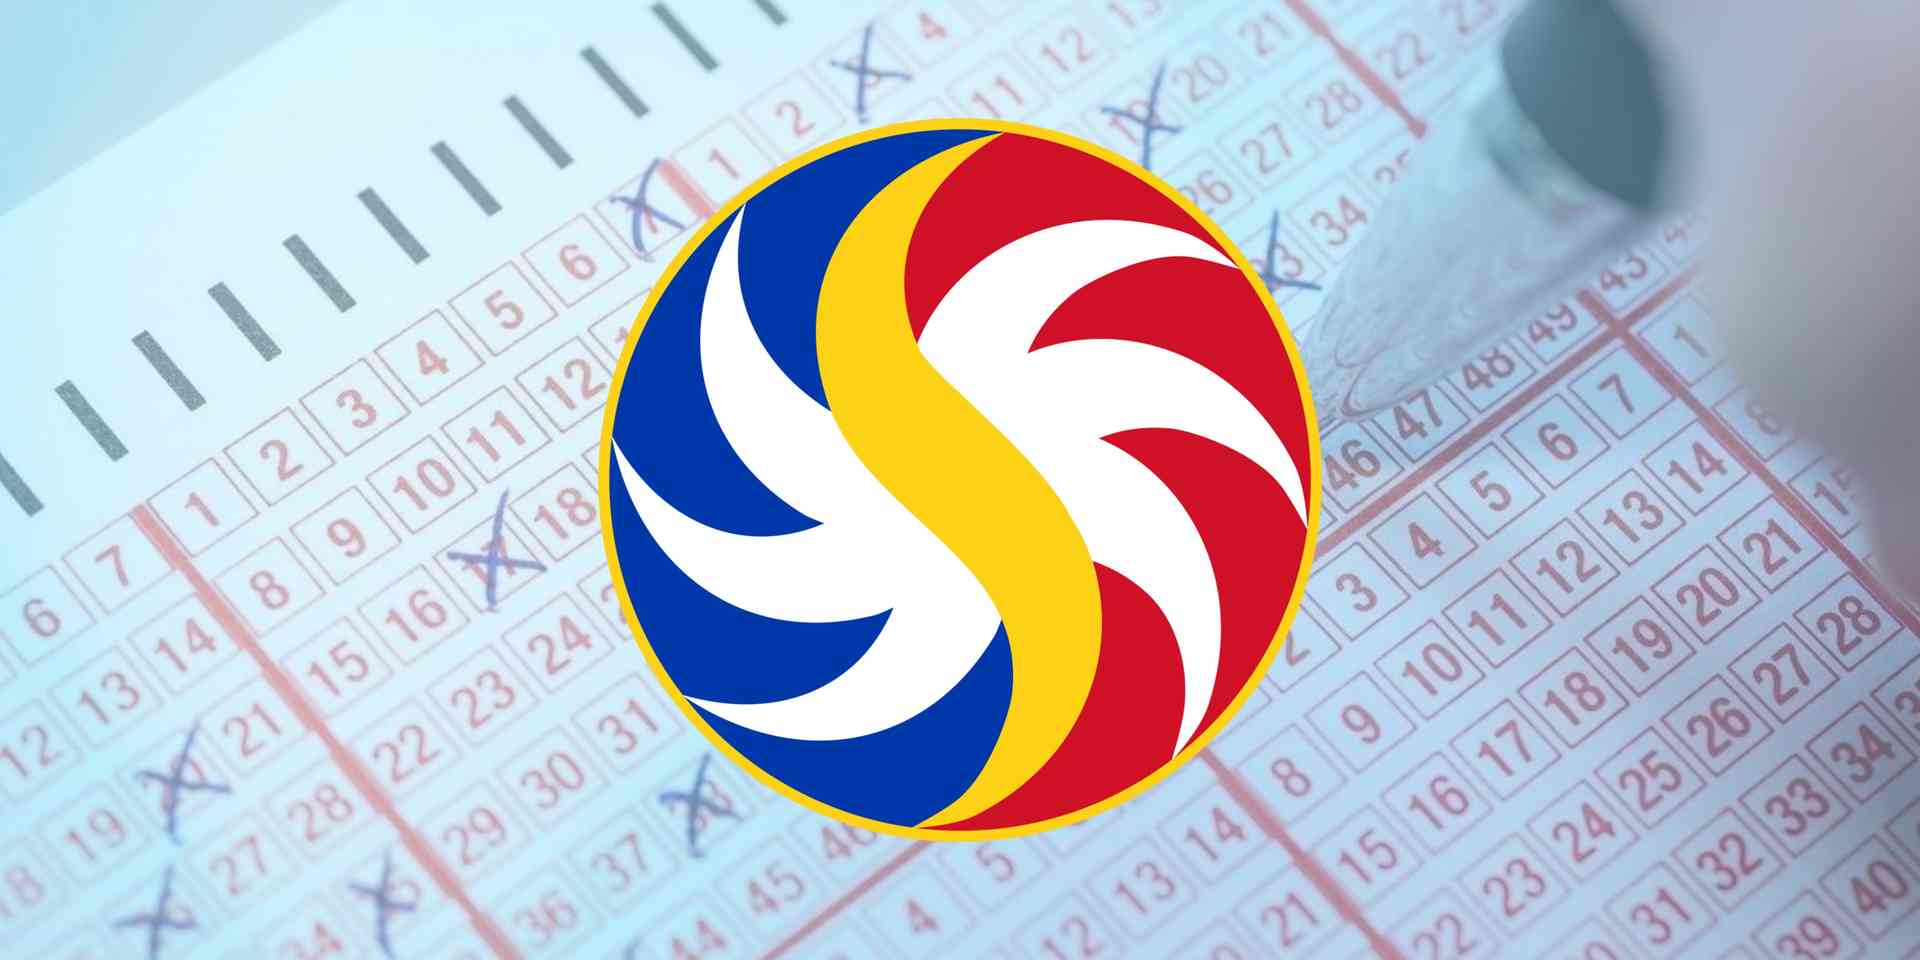 PCSO Lotto Draw Results on Monday, April 15